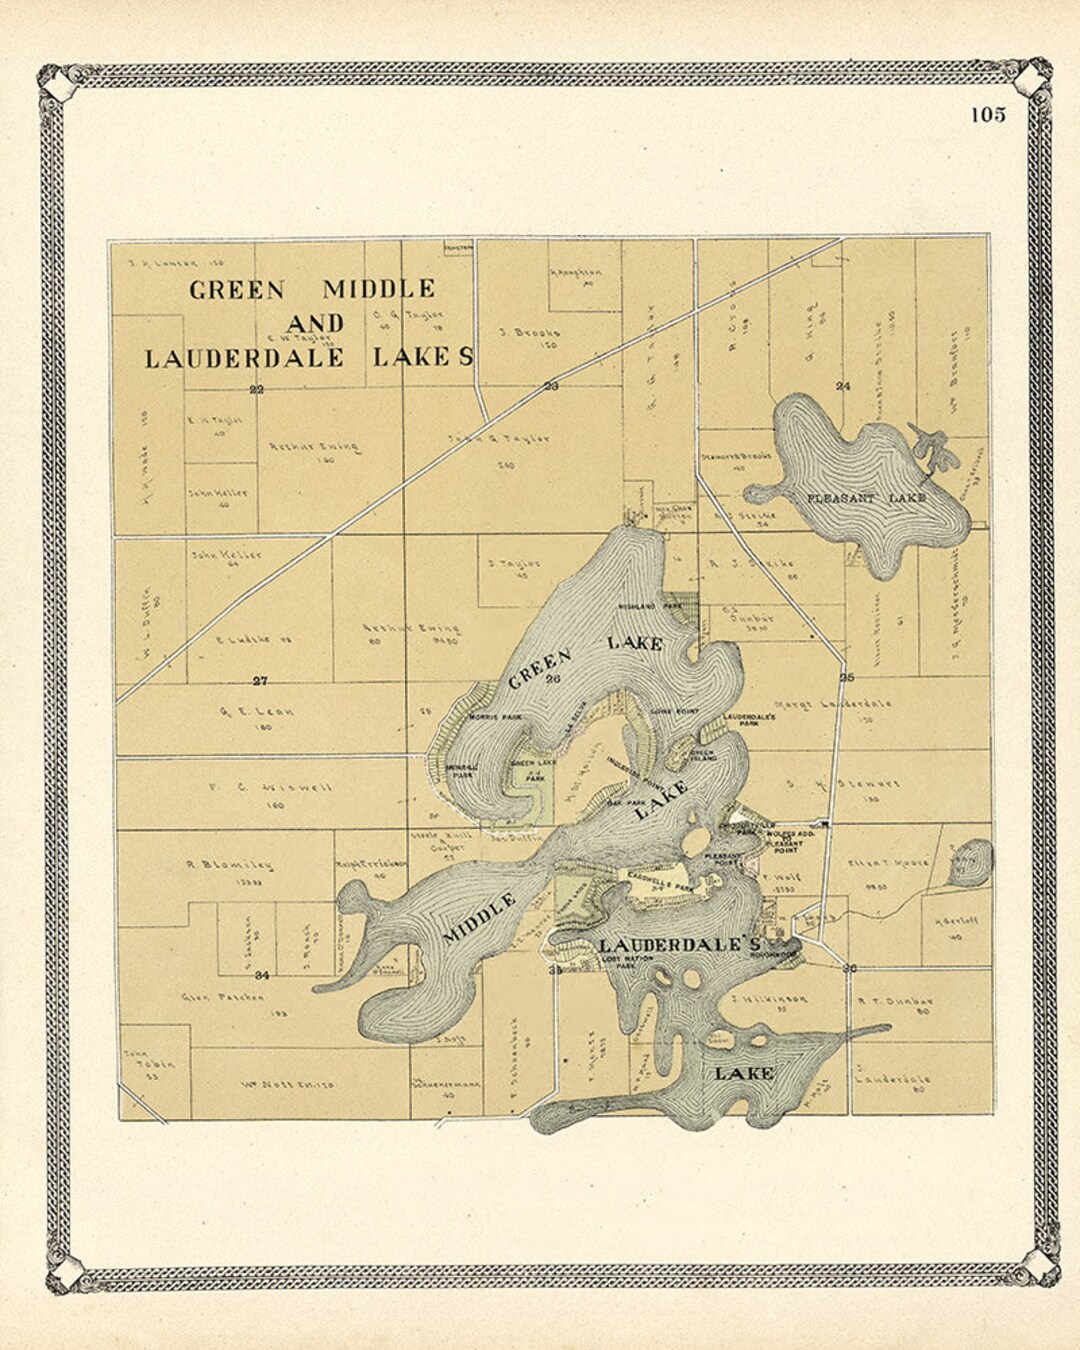 1907 Map of Greene Middle and Lauderdale Lakes Walworth County pic